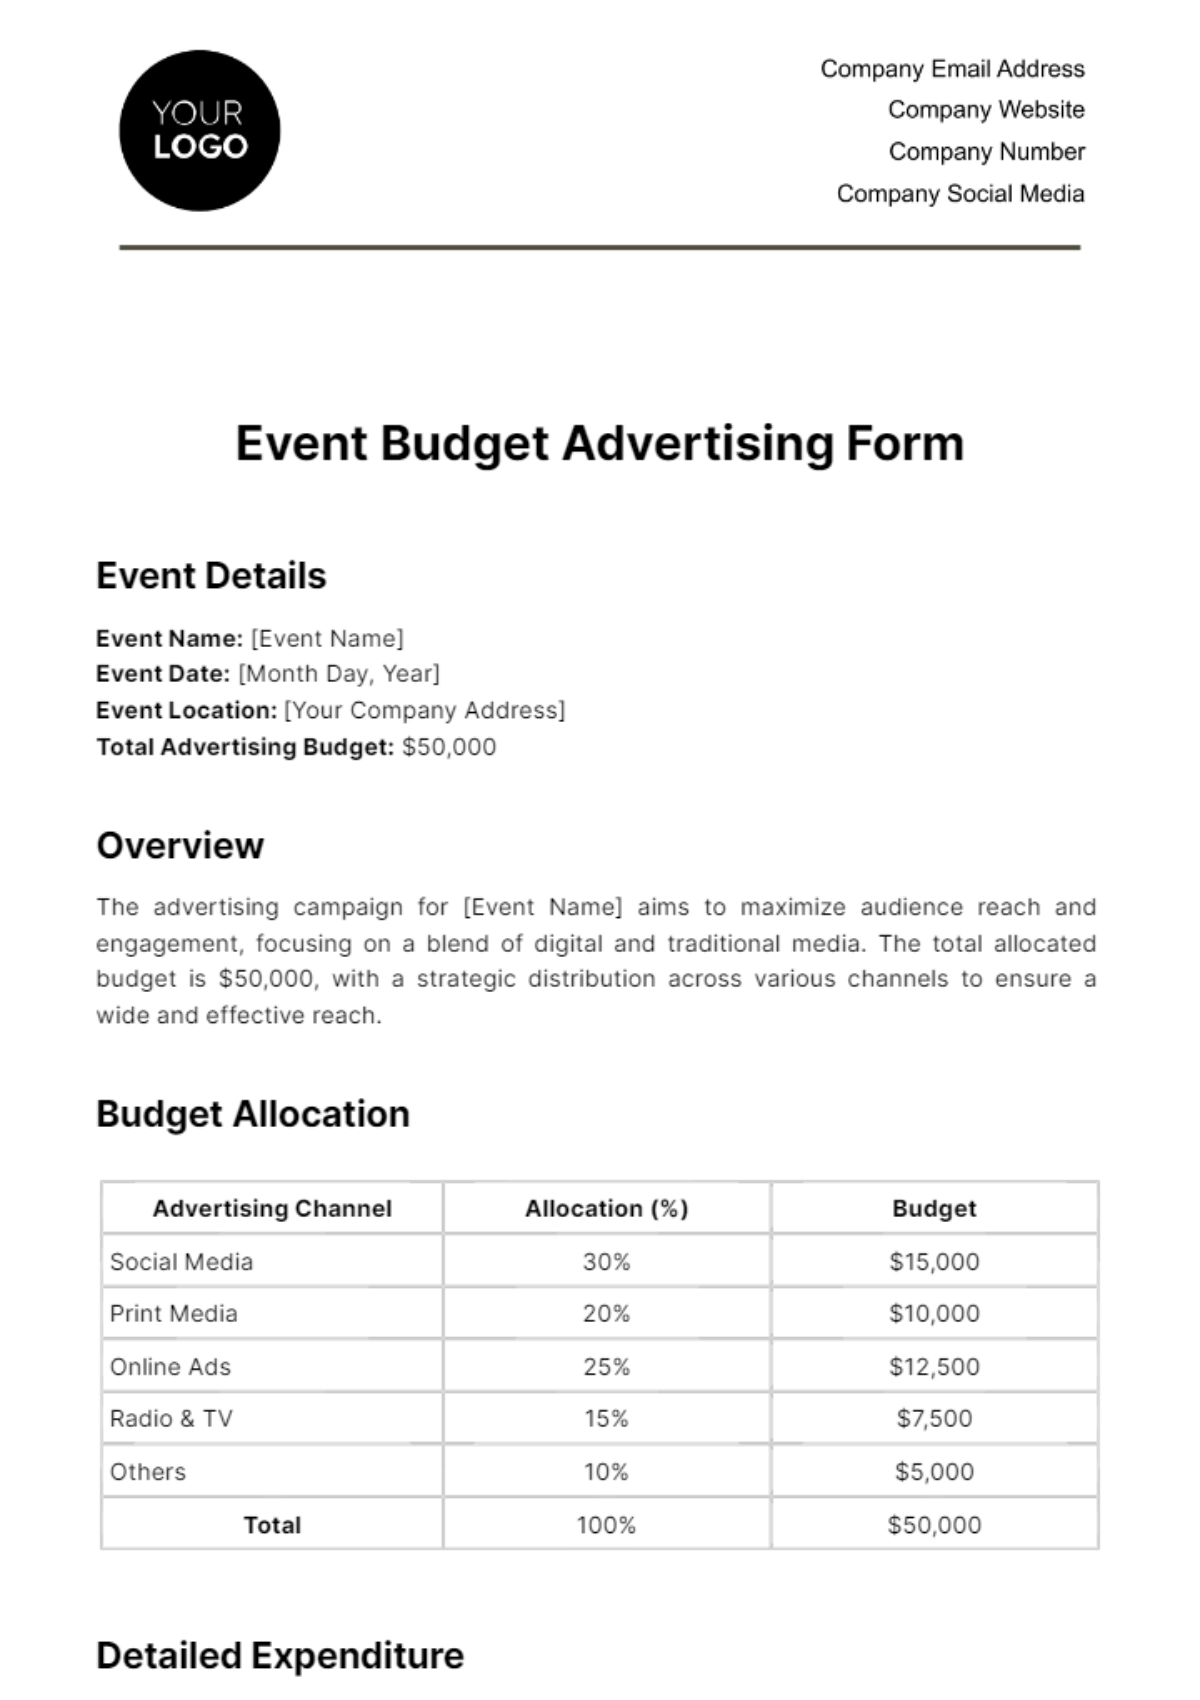 Event Budget Advertising Form Template